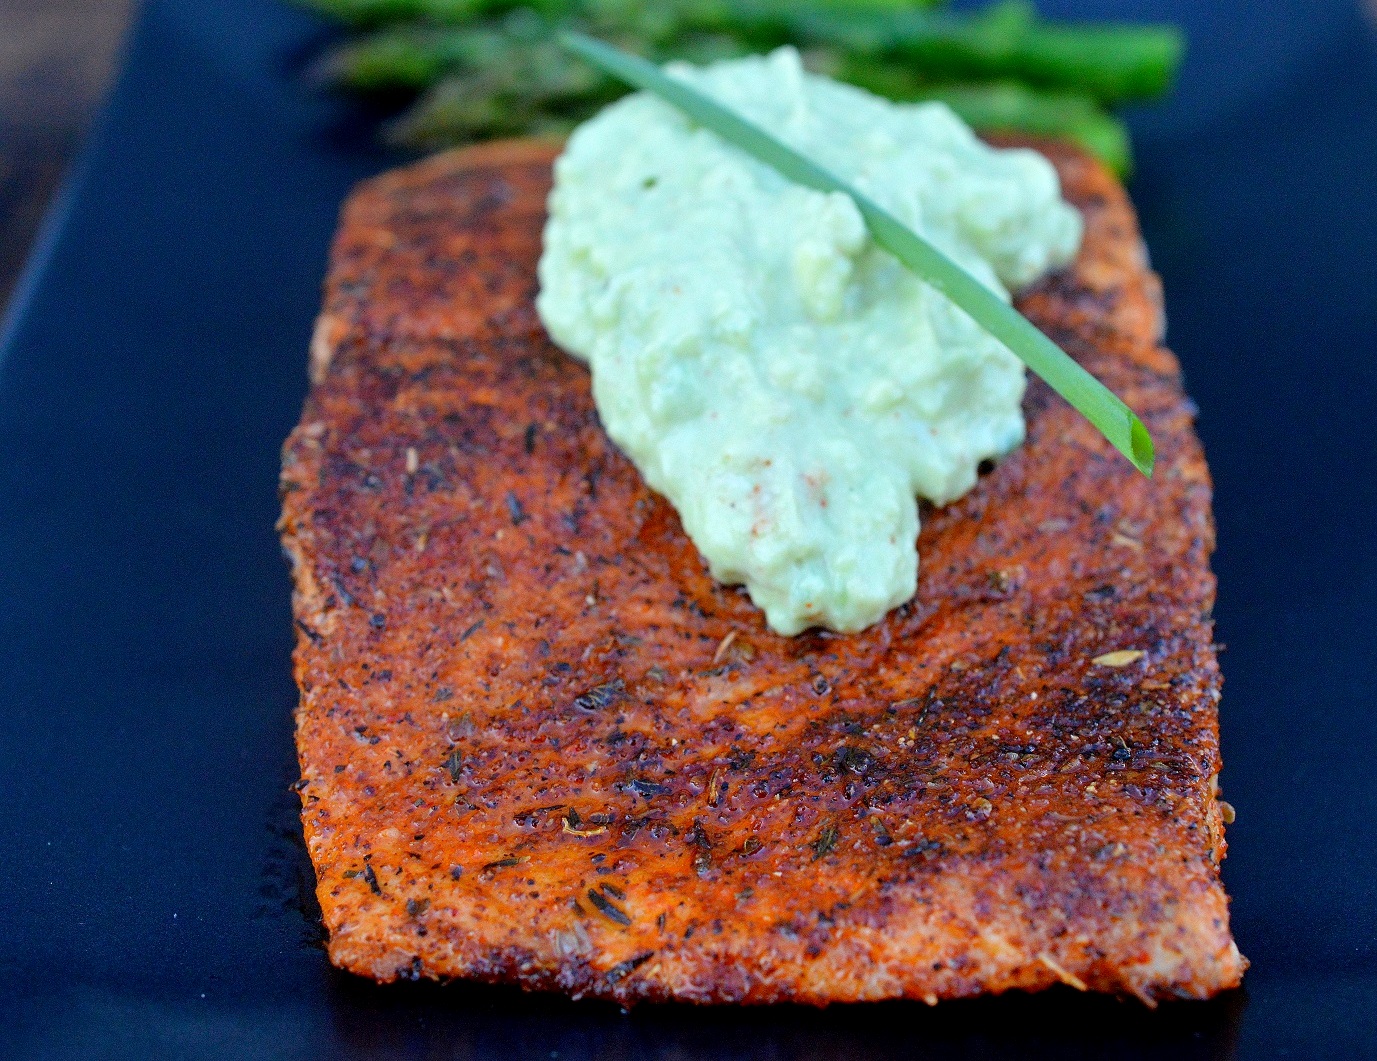 Blackened Salmon with Avocado Cream. A delicious and nutritious 20 minute meal!